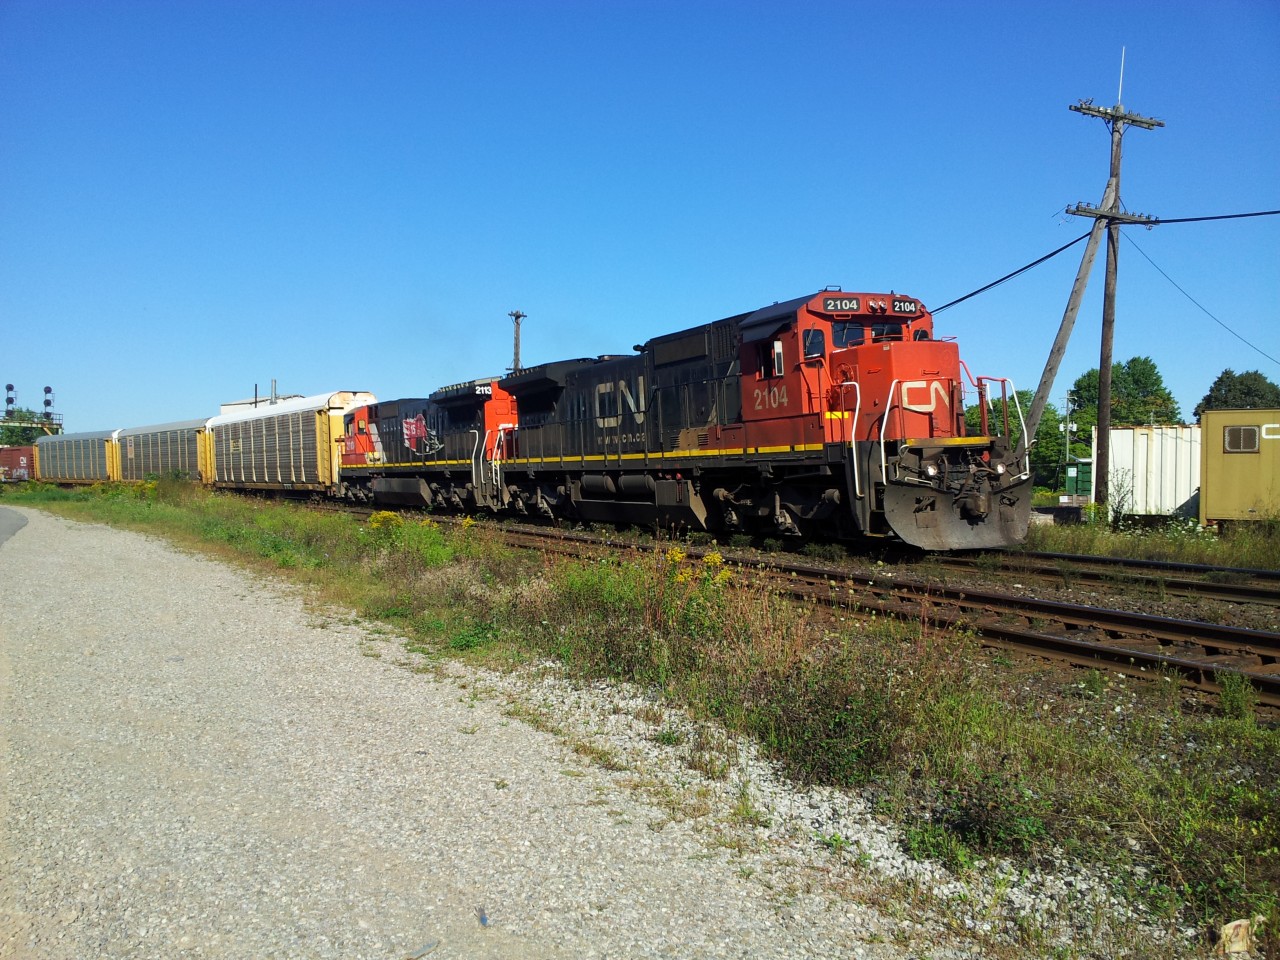 2104 and 2113 lead 148 through Paris, Ontario. Nice to see a pair of C40-8s leading.